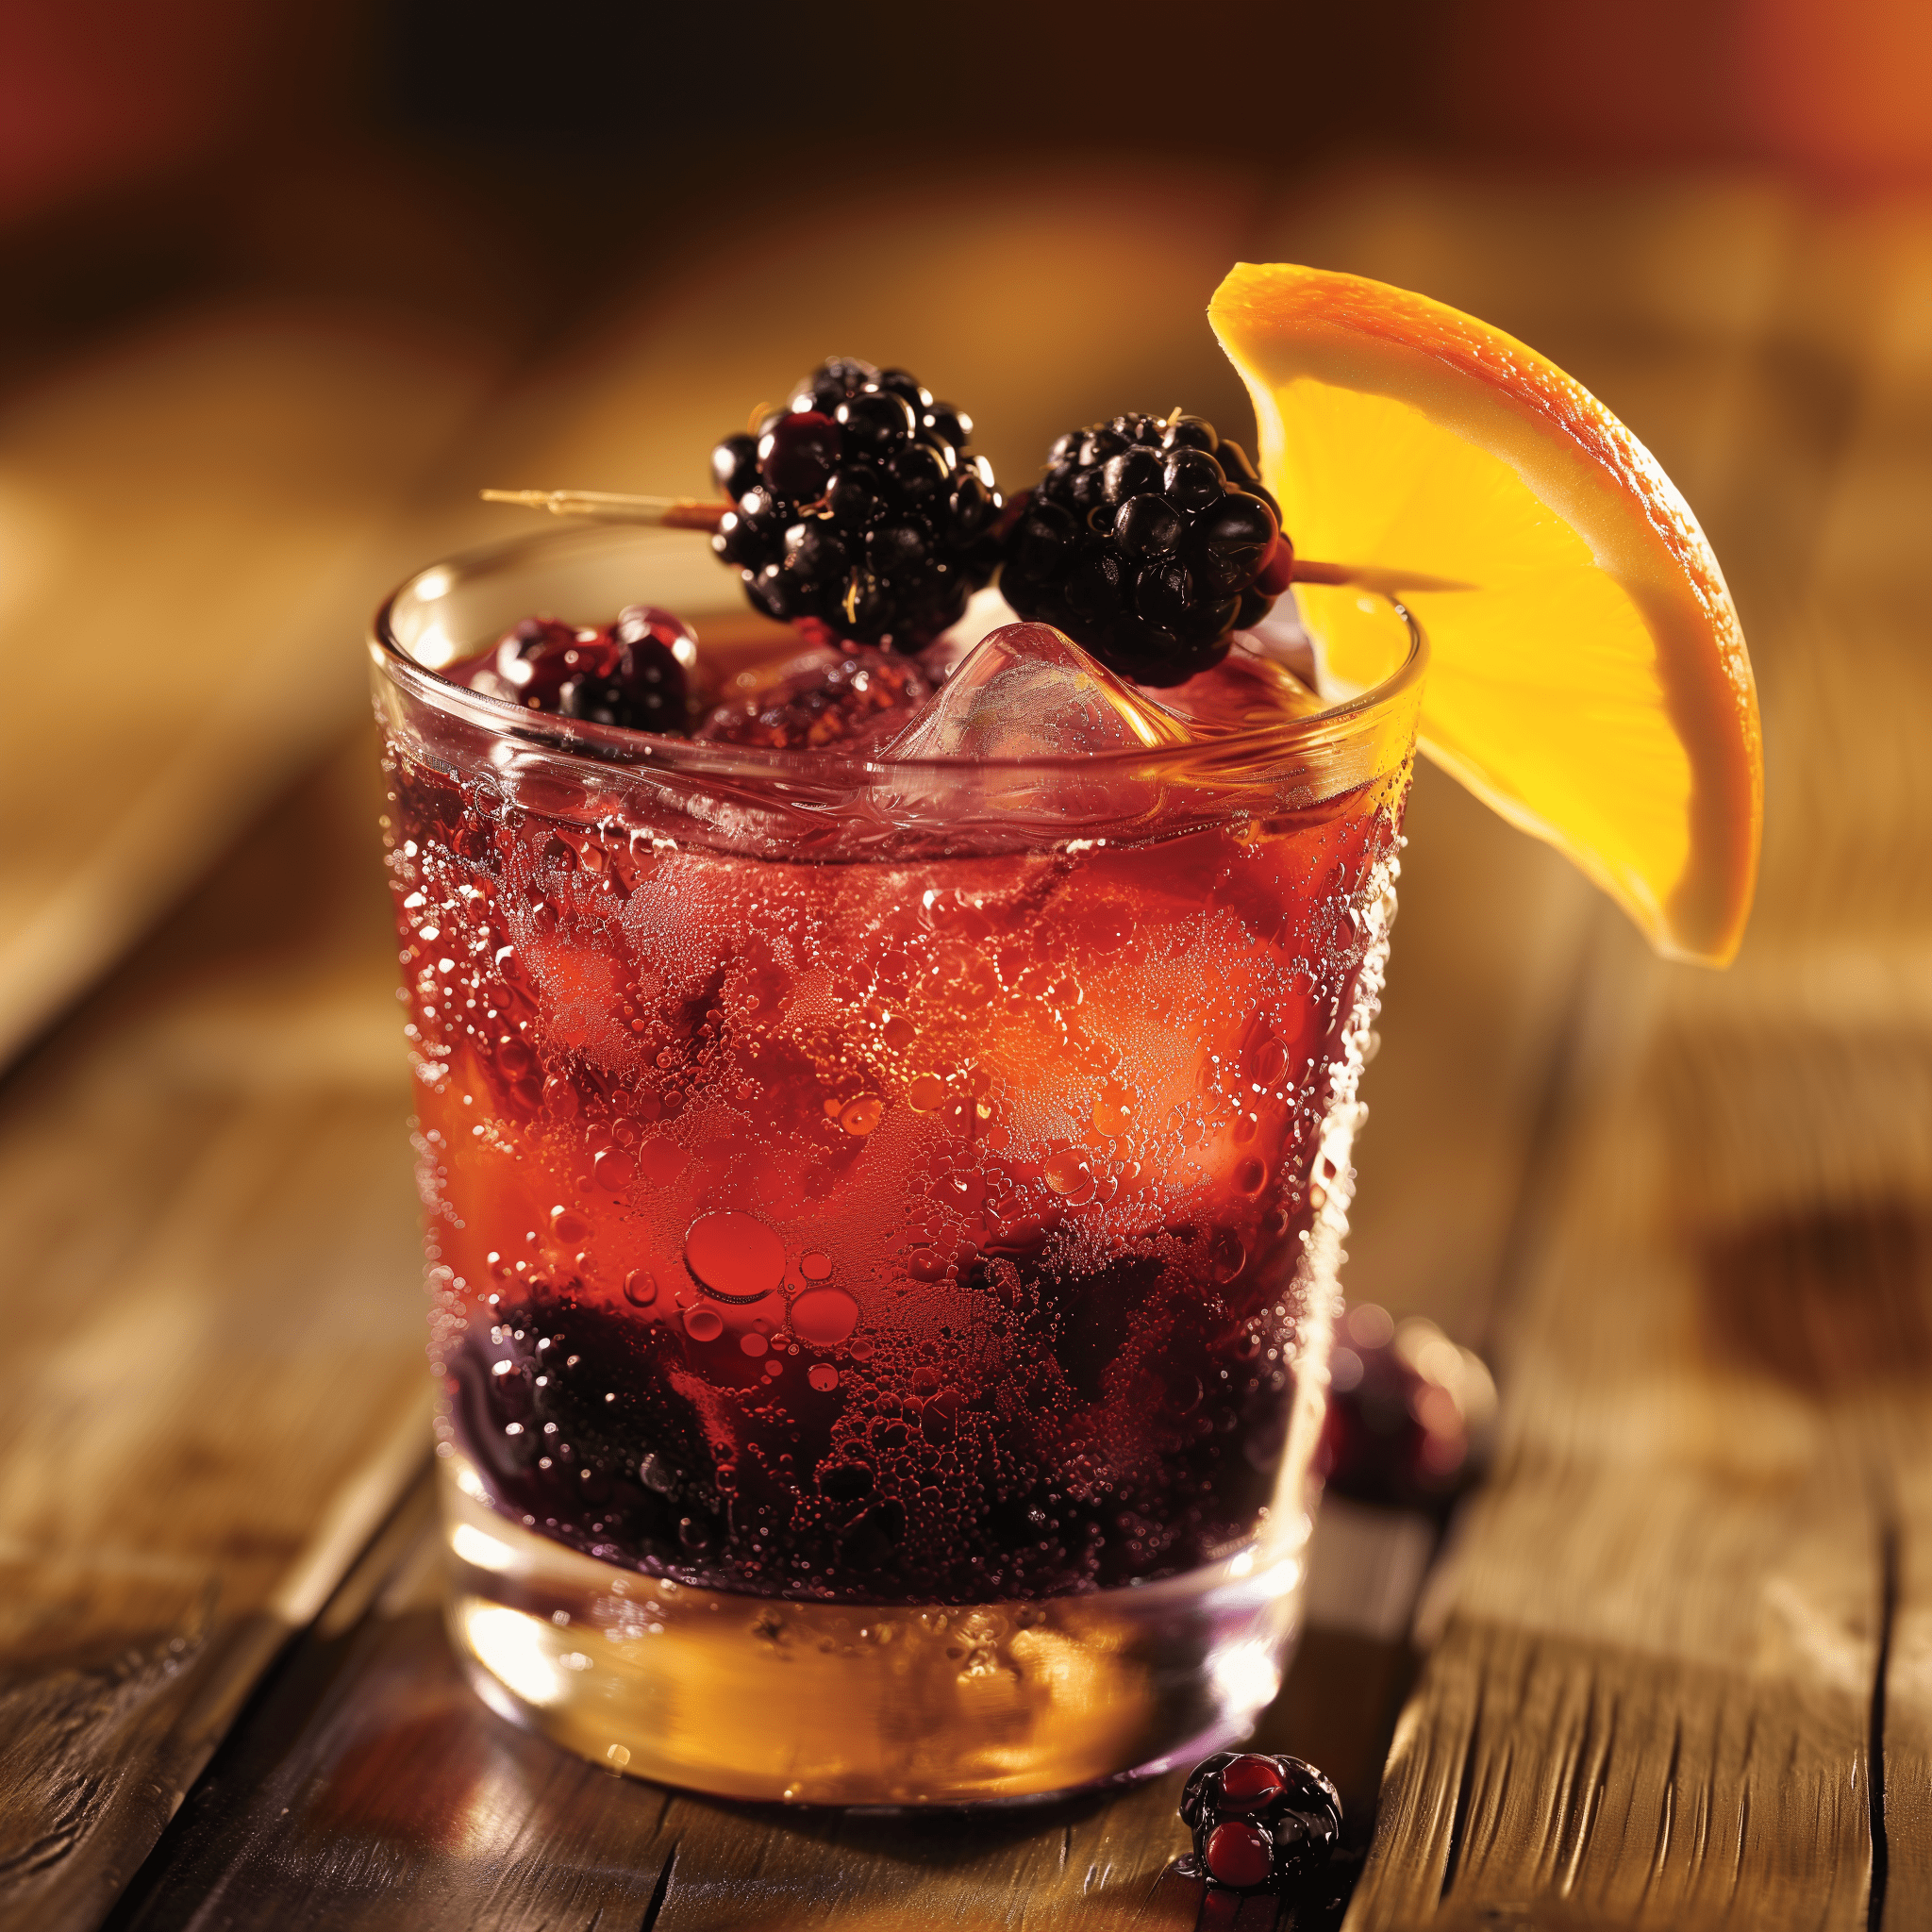 Blackberry Sangria Cocktail Recipe - The taste of Blackberry Sangria is a harmonious blend of sweet and tart, with the luscious blackberries complementing the dryness of the red wine. It's fruity, slightly acidic, and carries a subtle hint of citrus from the added lemon juice, rounded out with a touch of sweetness from the simple syrup.